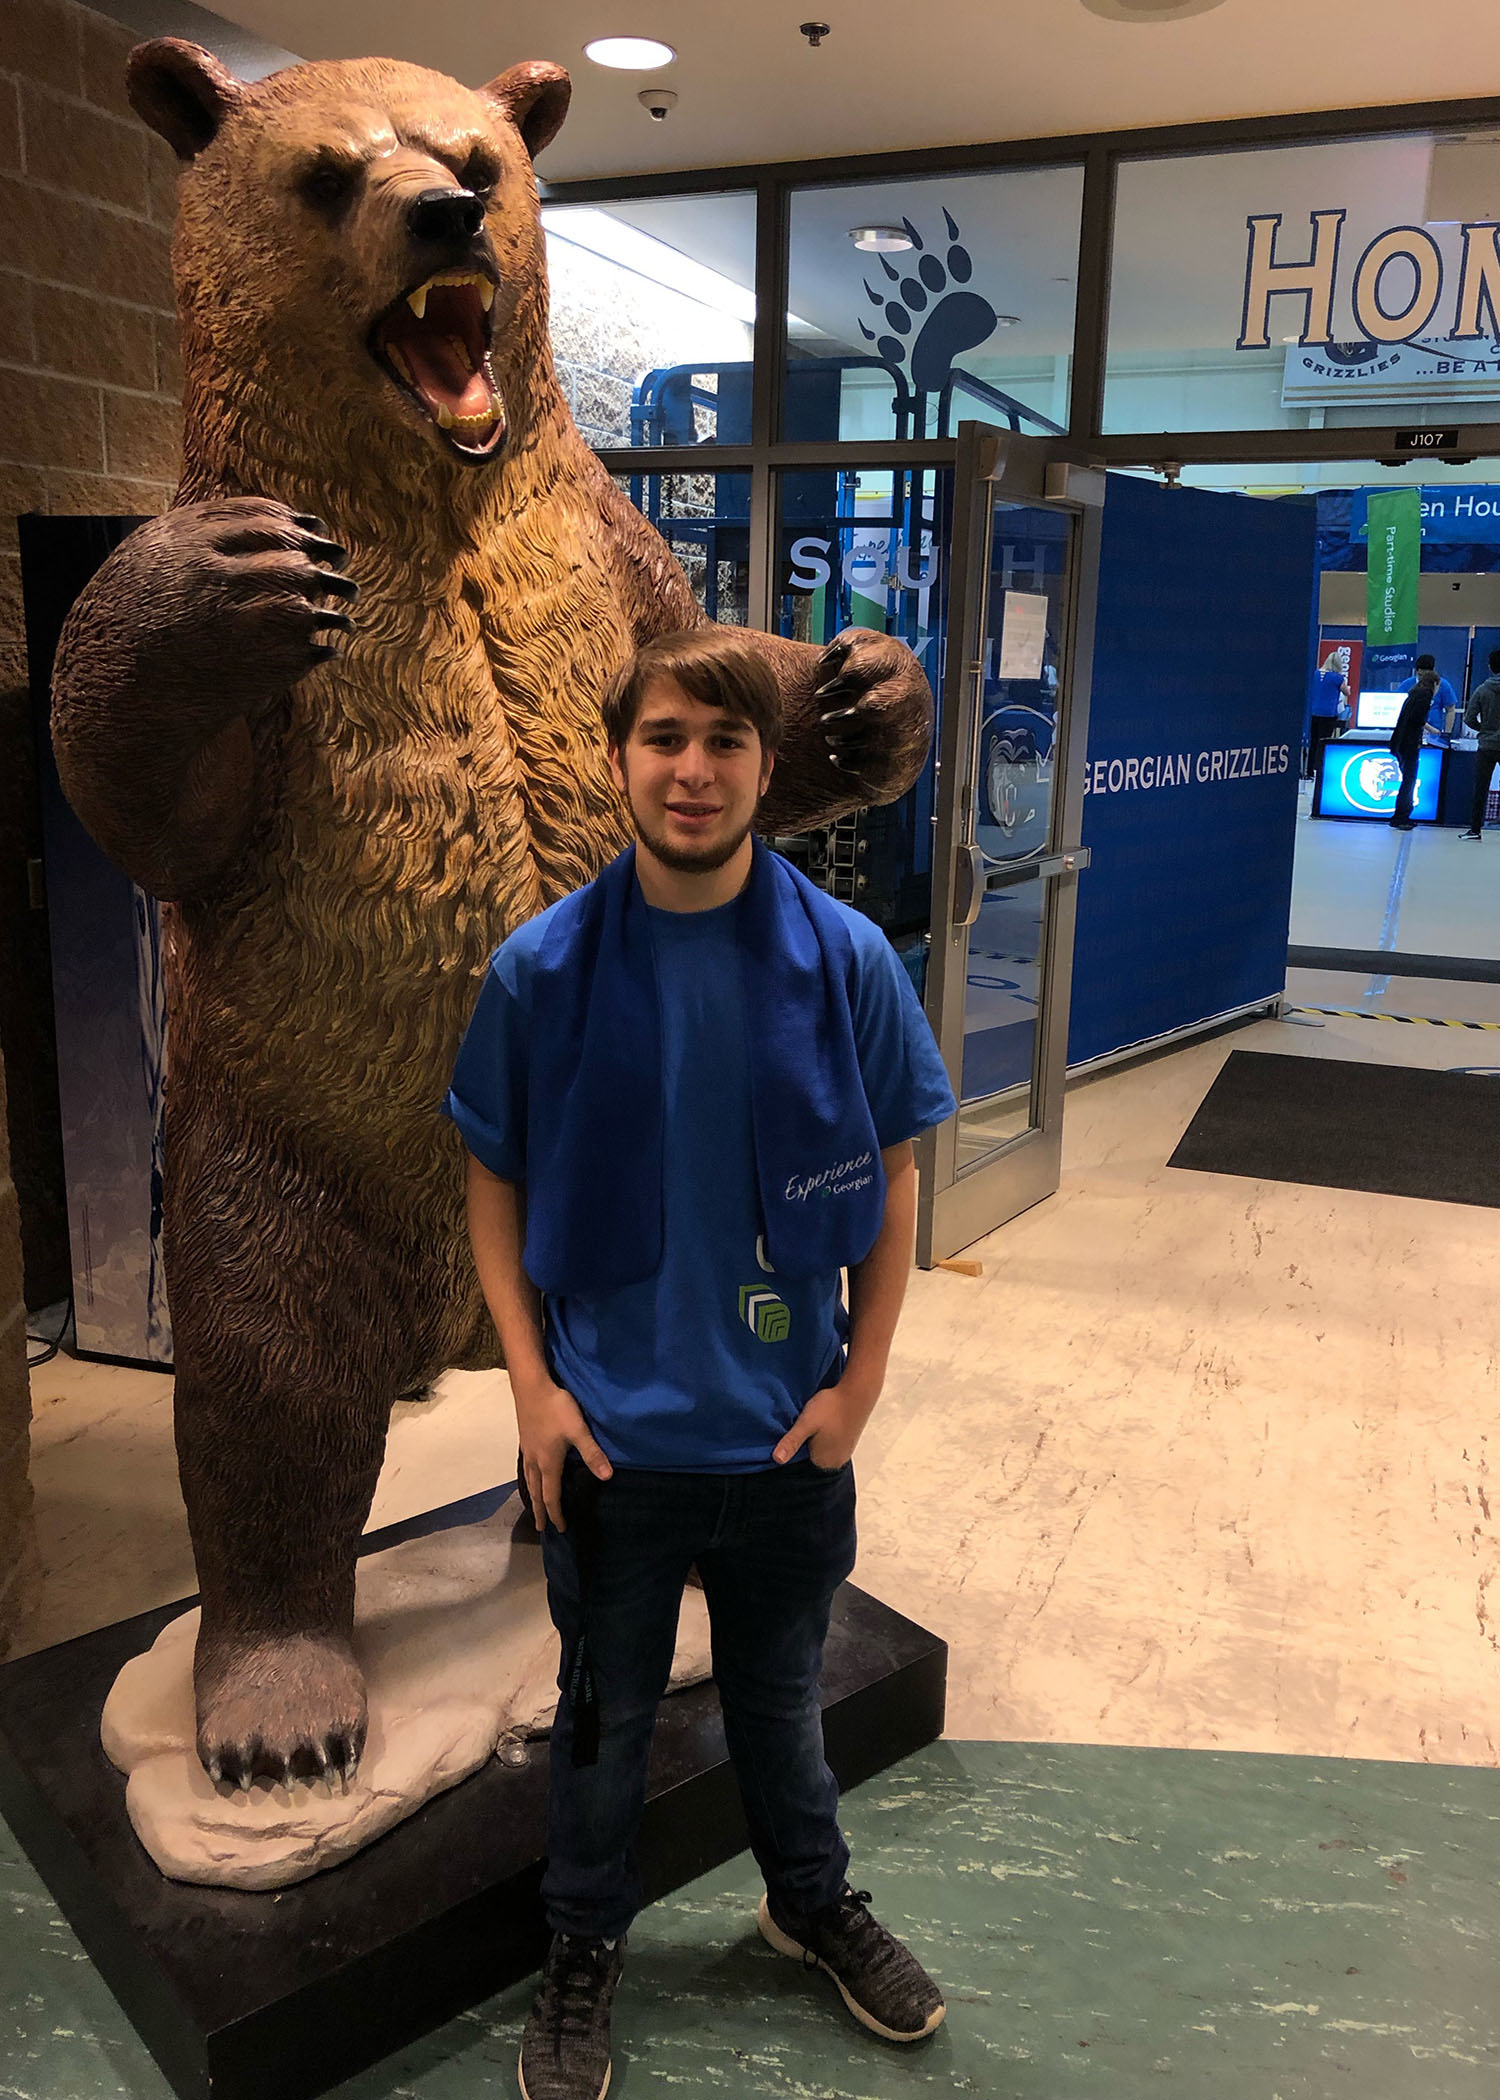 Joseph Alaimo standing next to the Georgian College Grizzly